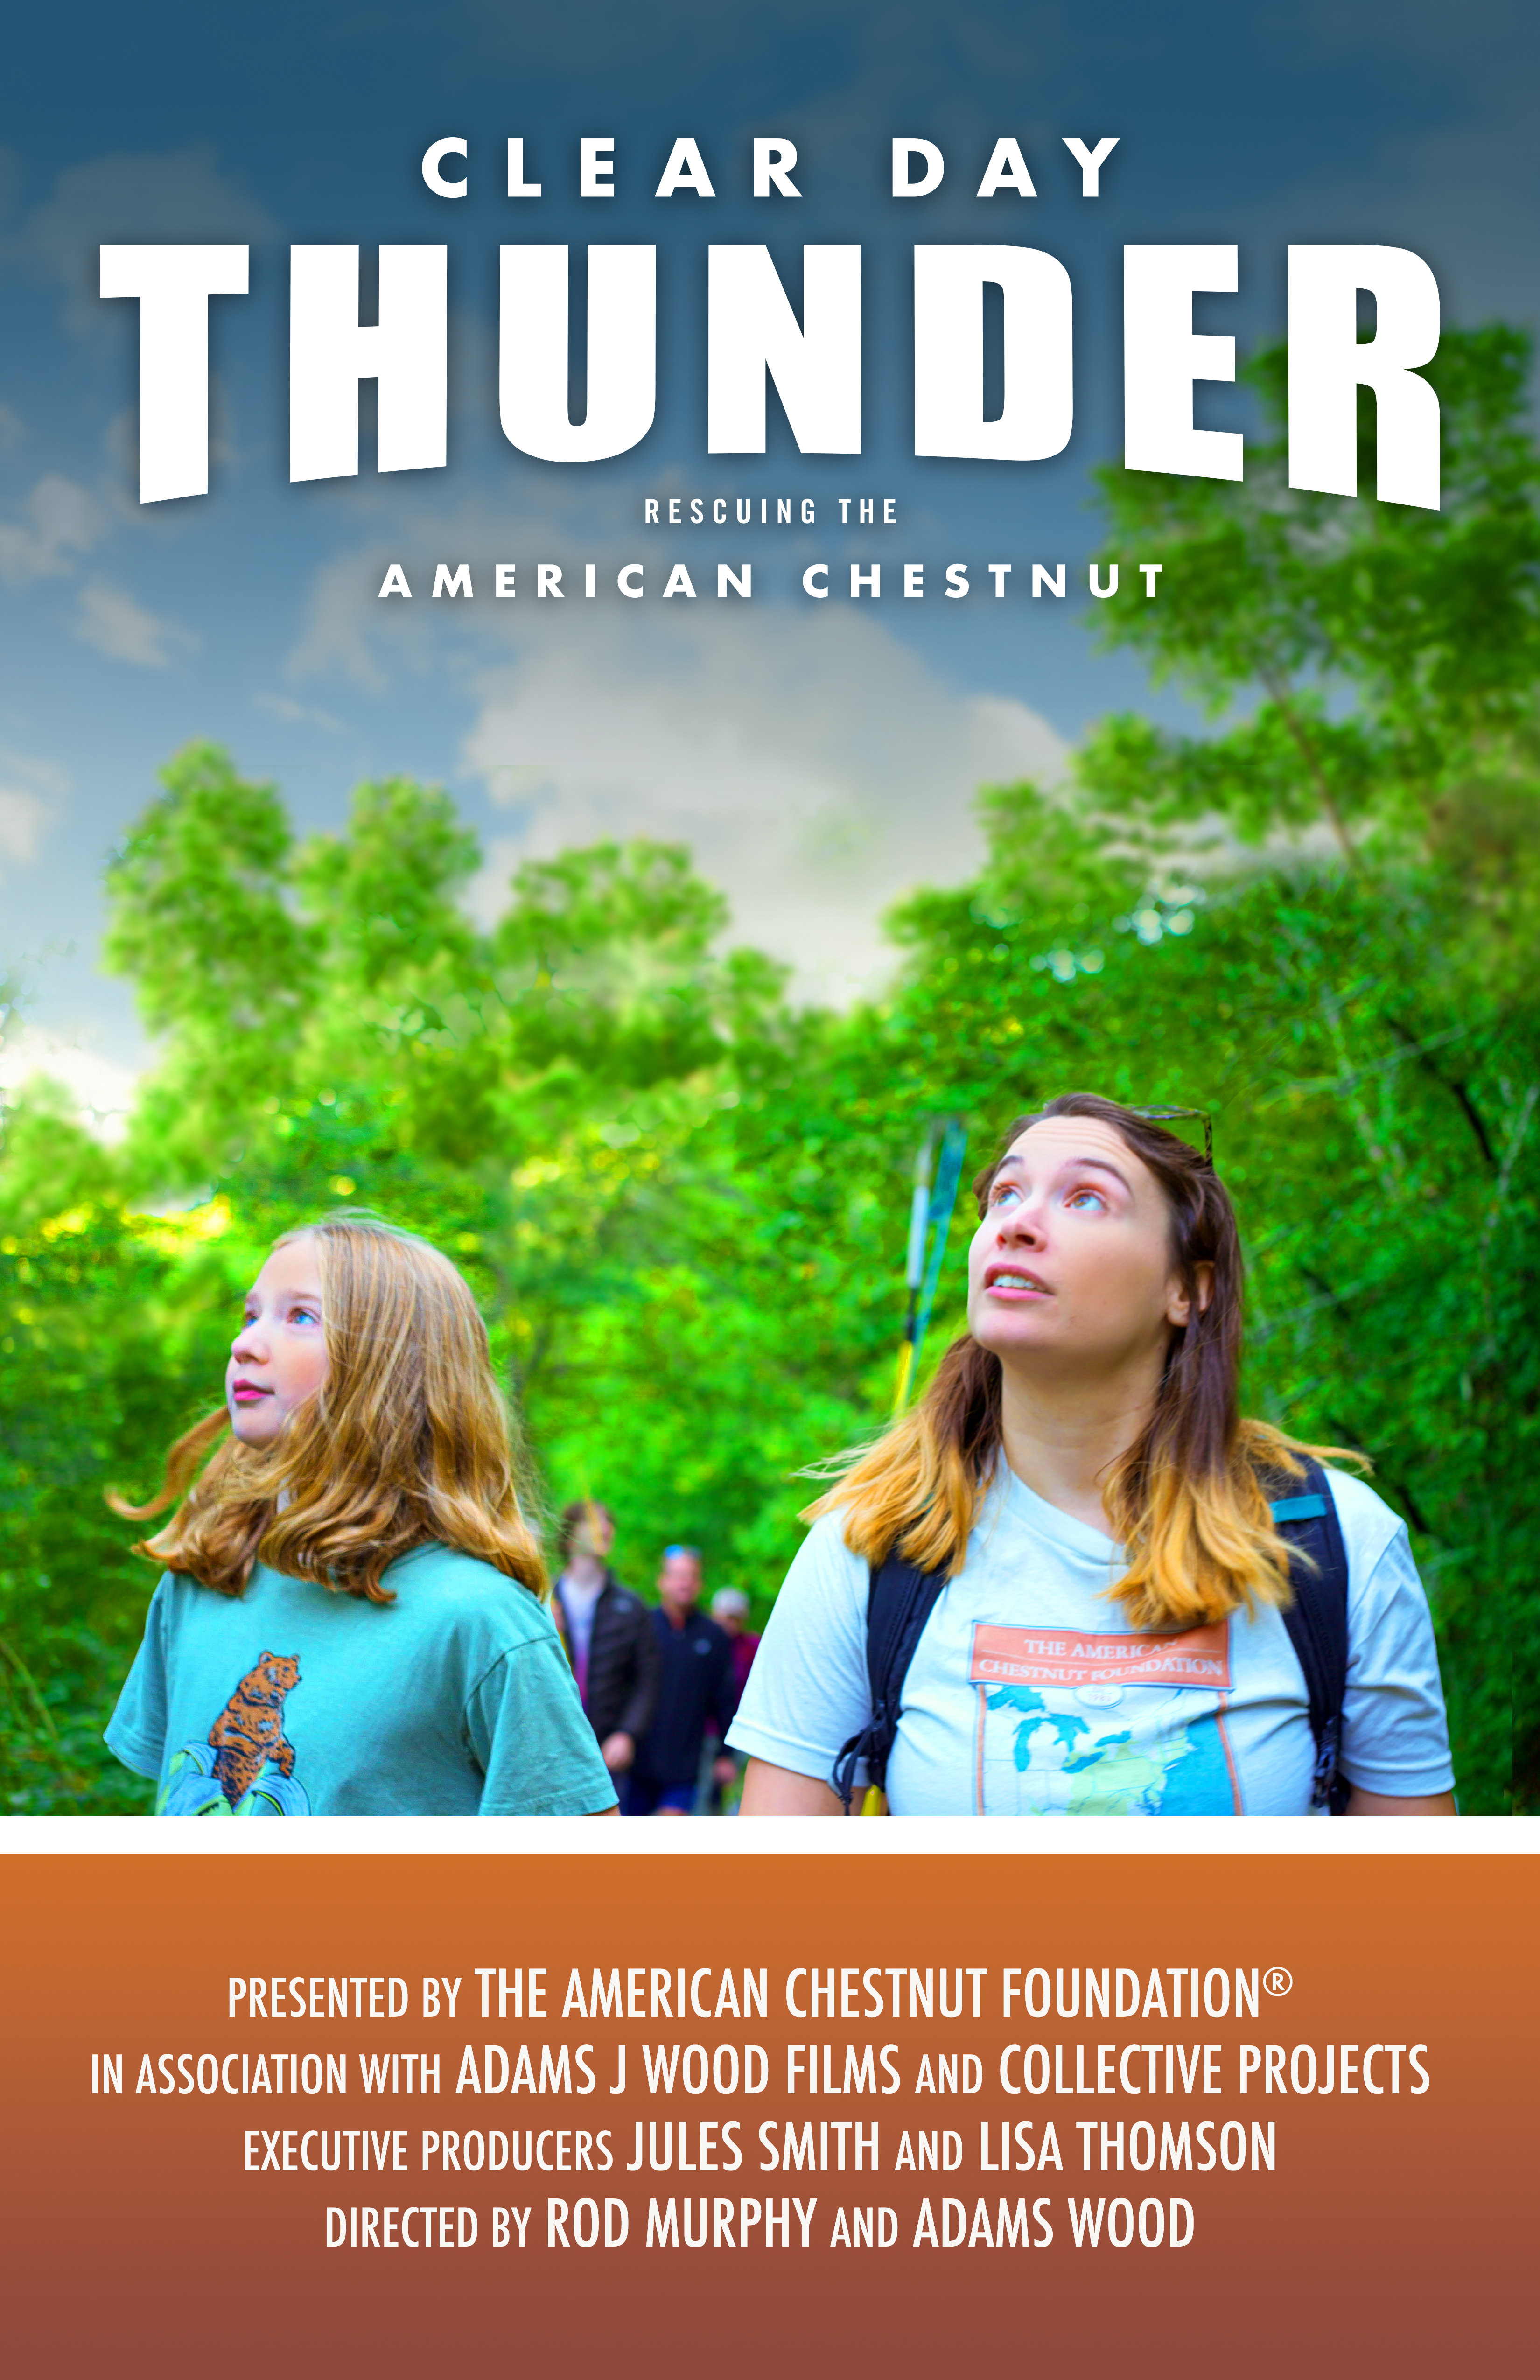 Cover Art for "Clear Day Thunder: Rescuing the American Chestnut"